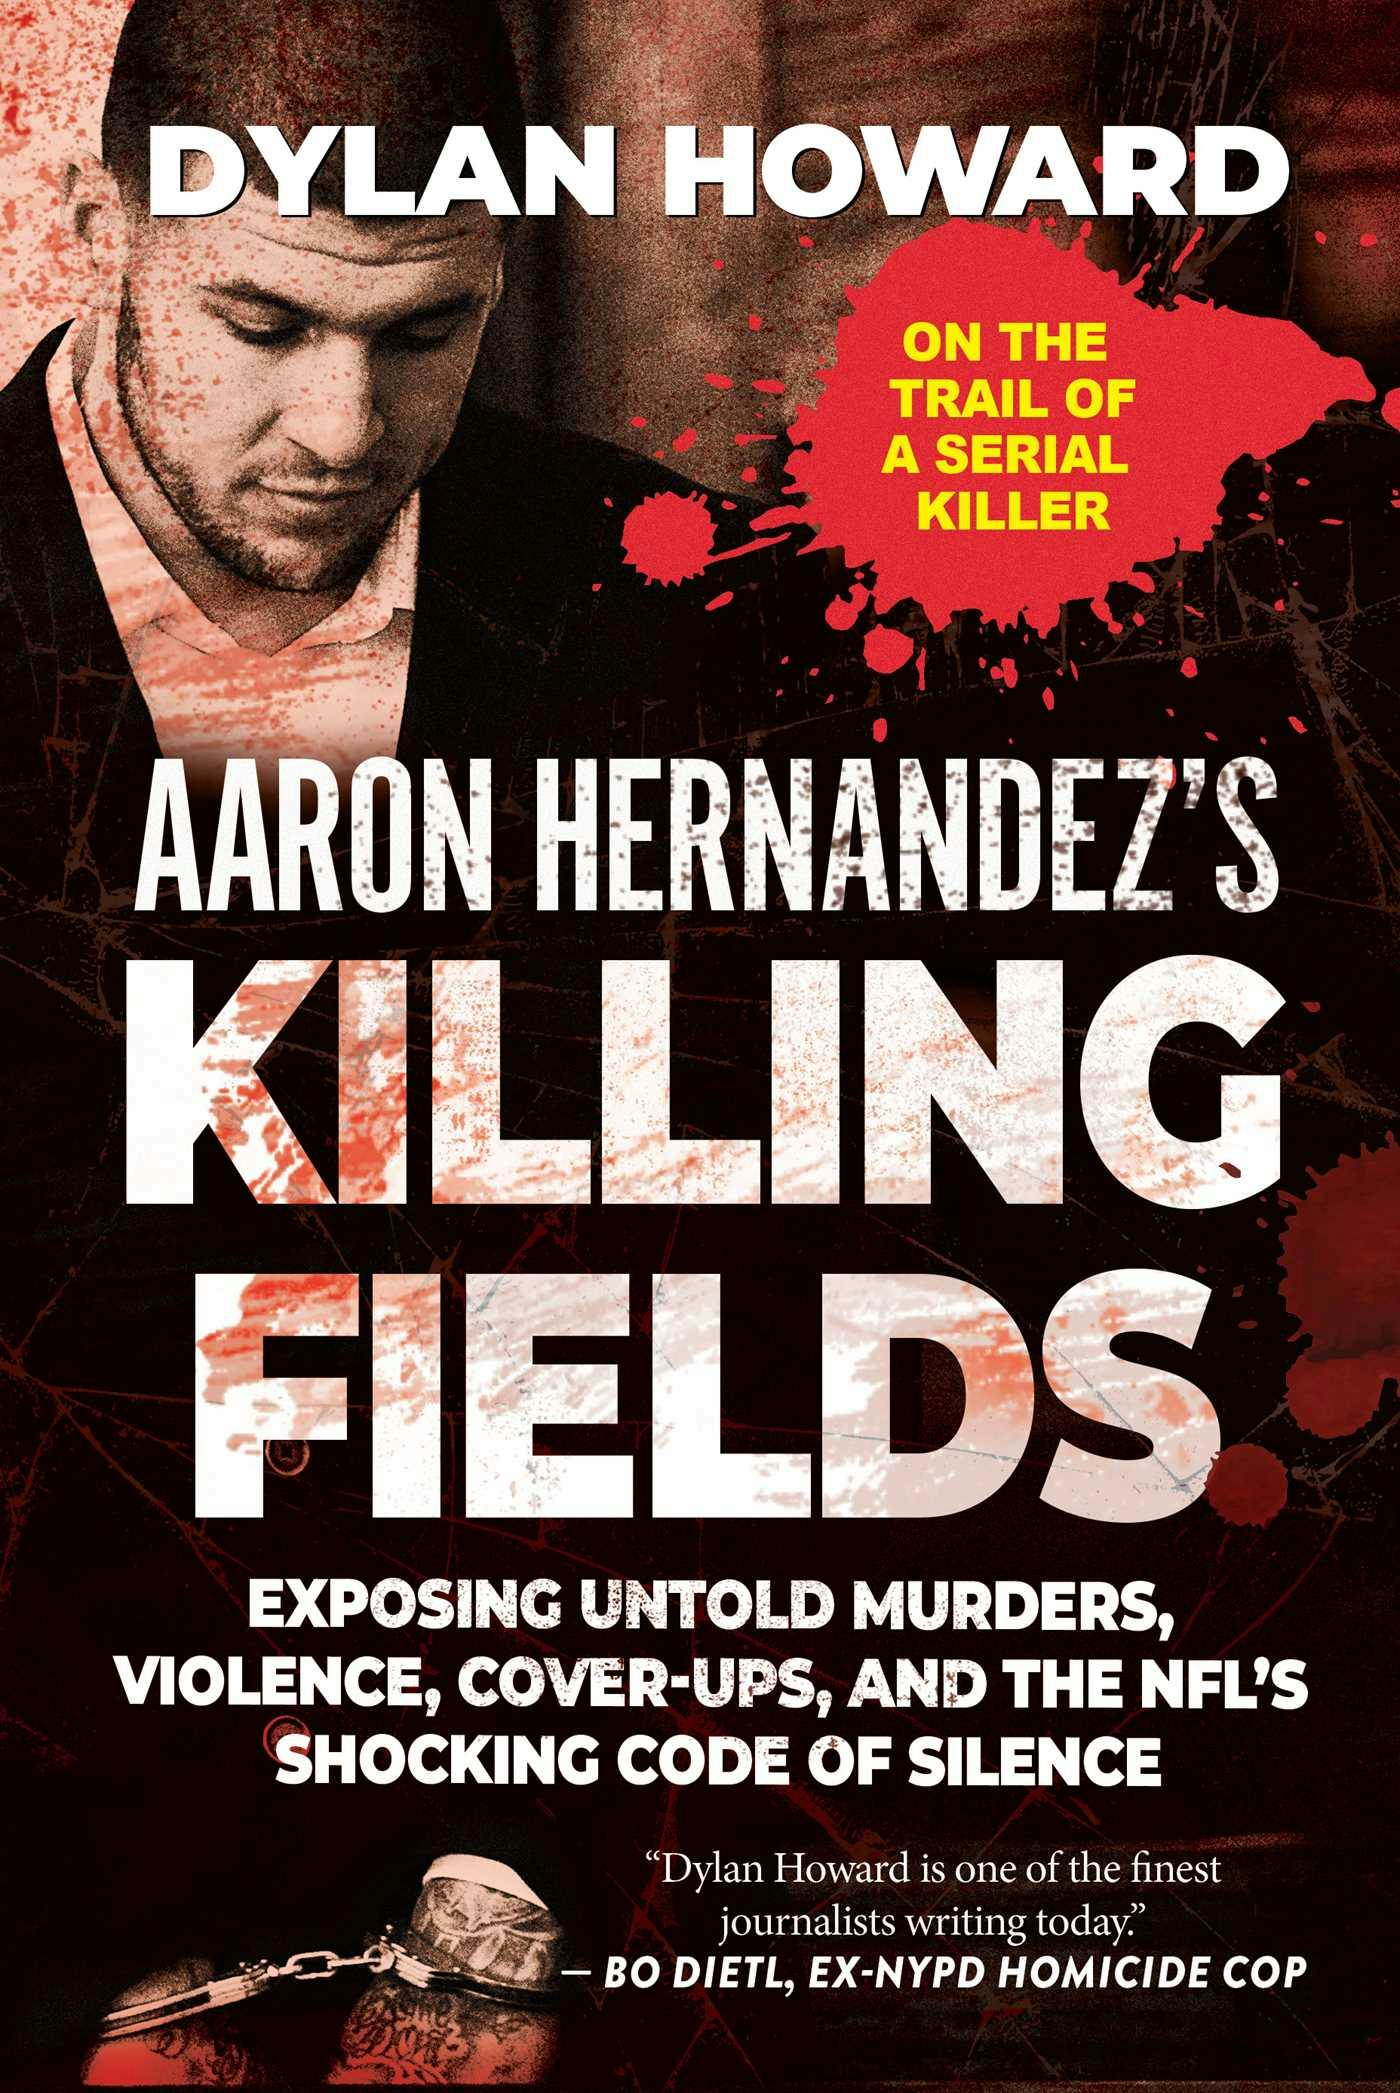 Aaron Hernandez's Killing Fields: Exposing Untold Murders, Violence, Cover-Ups, and the NFL's Shocking Code of Silence - Dylan Howard